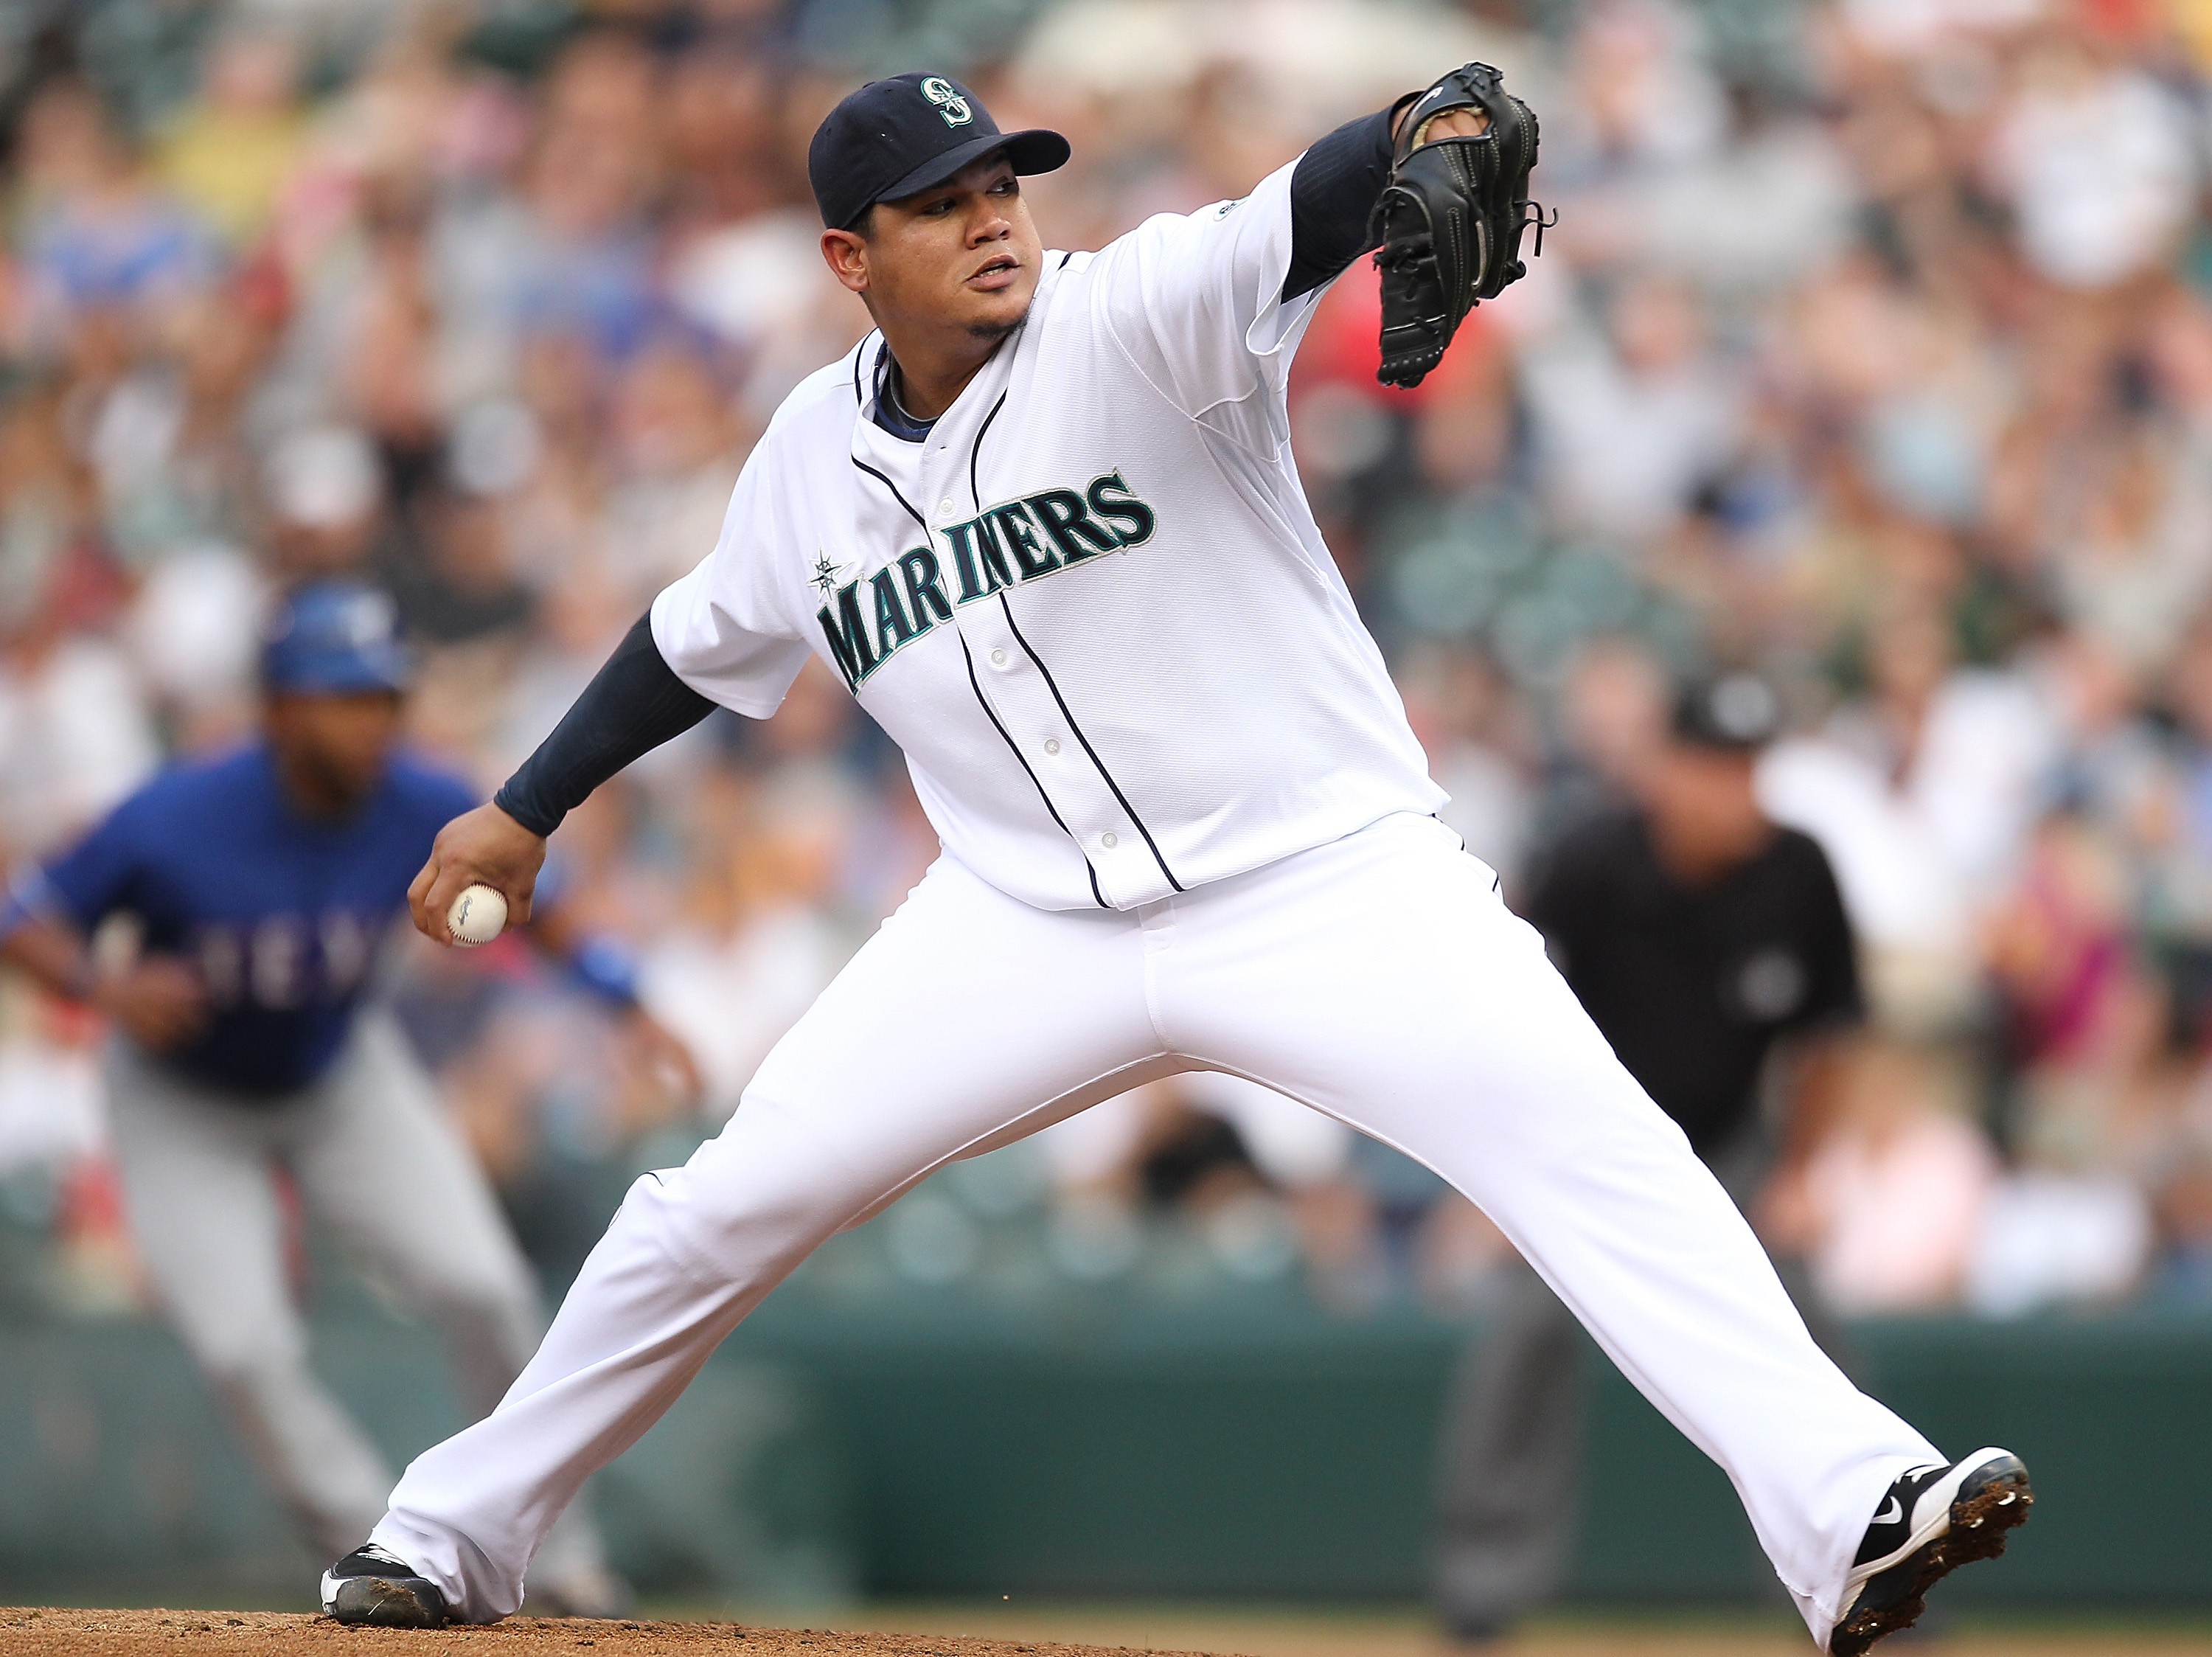 Who is 2018 Felix Hernandez? And where did his fastball go?